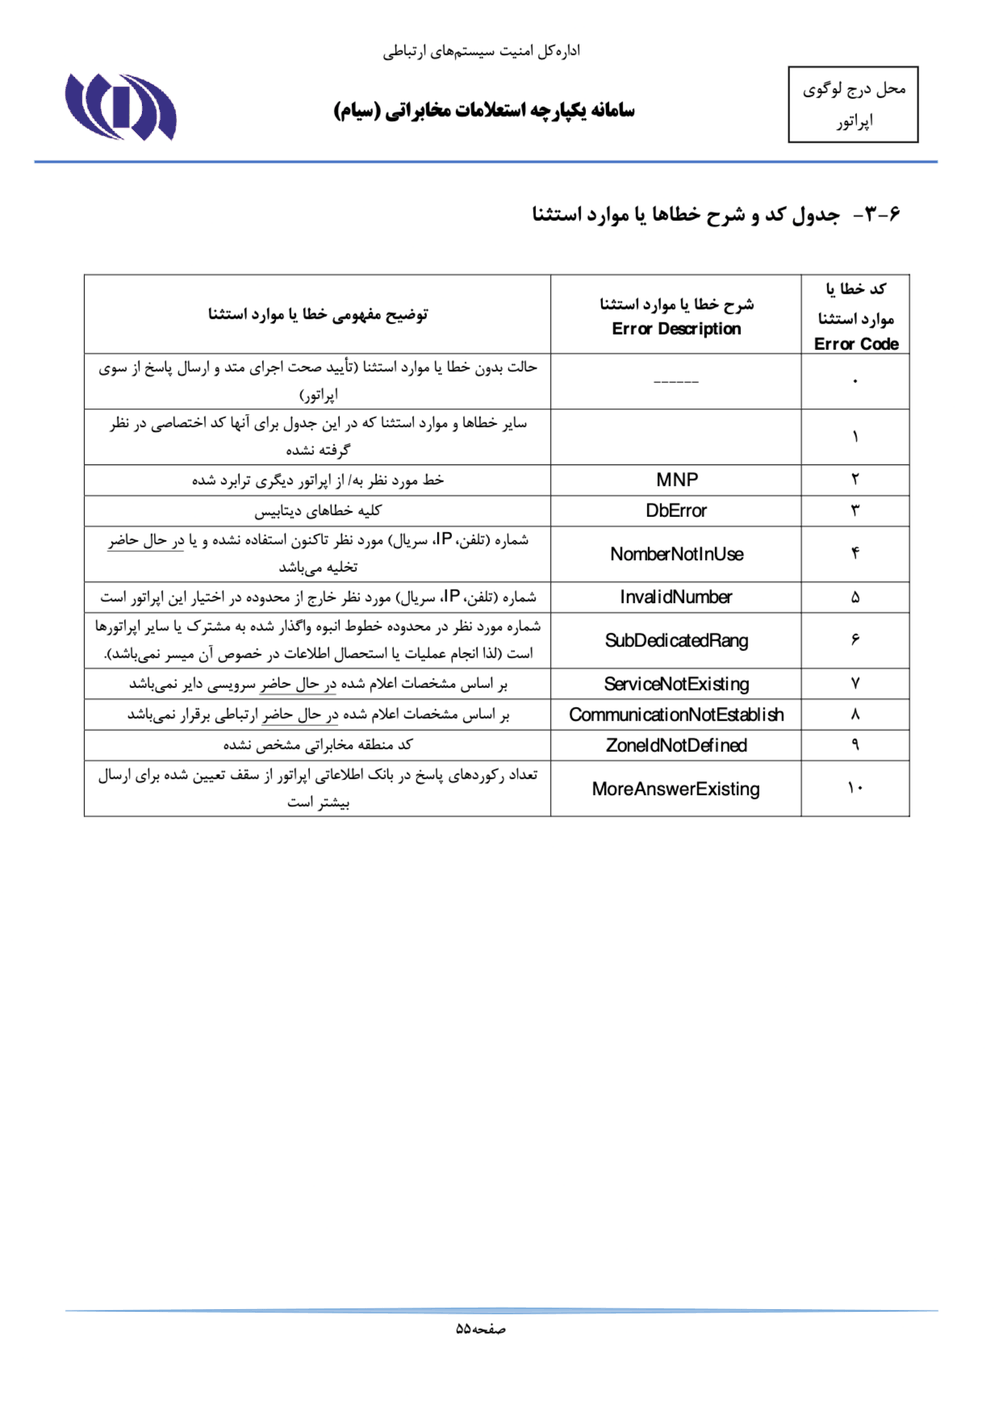 Page 55 from Iran’s SIAM Manual in Persian for Tracking and Controlling Mobile Phones